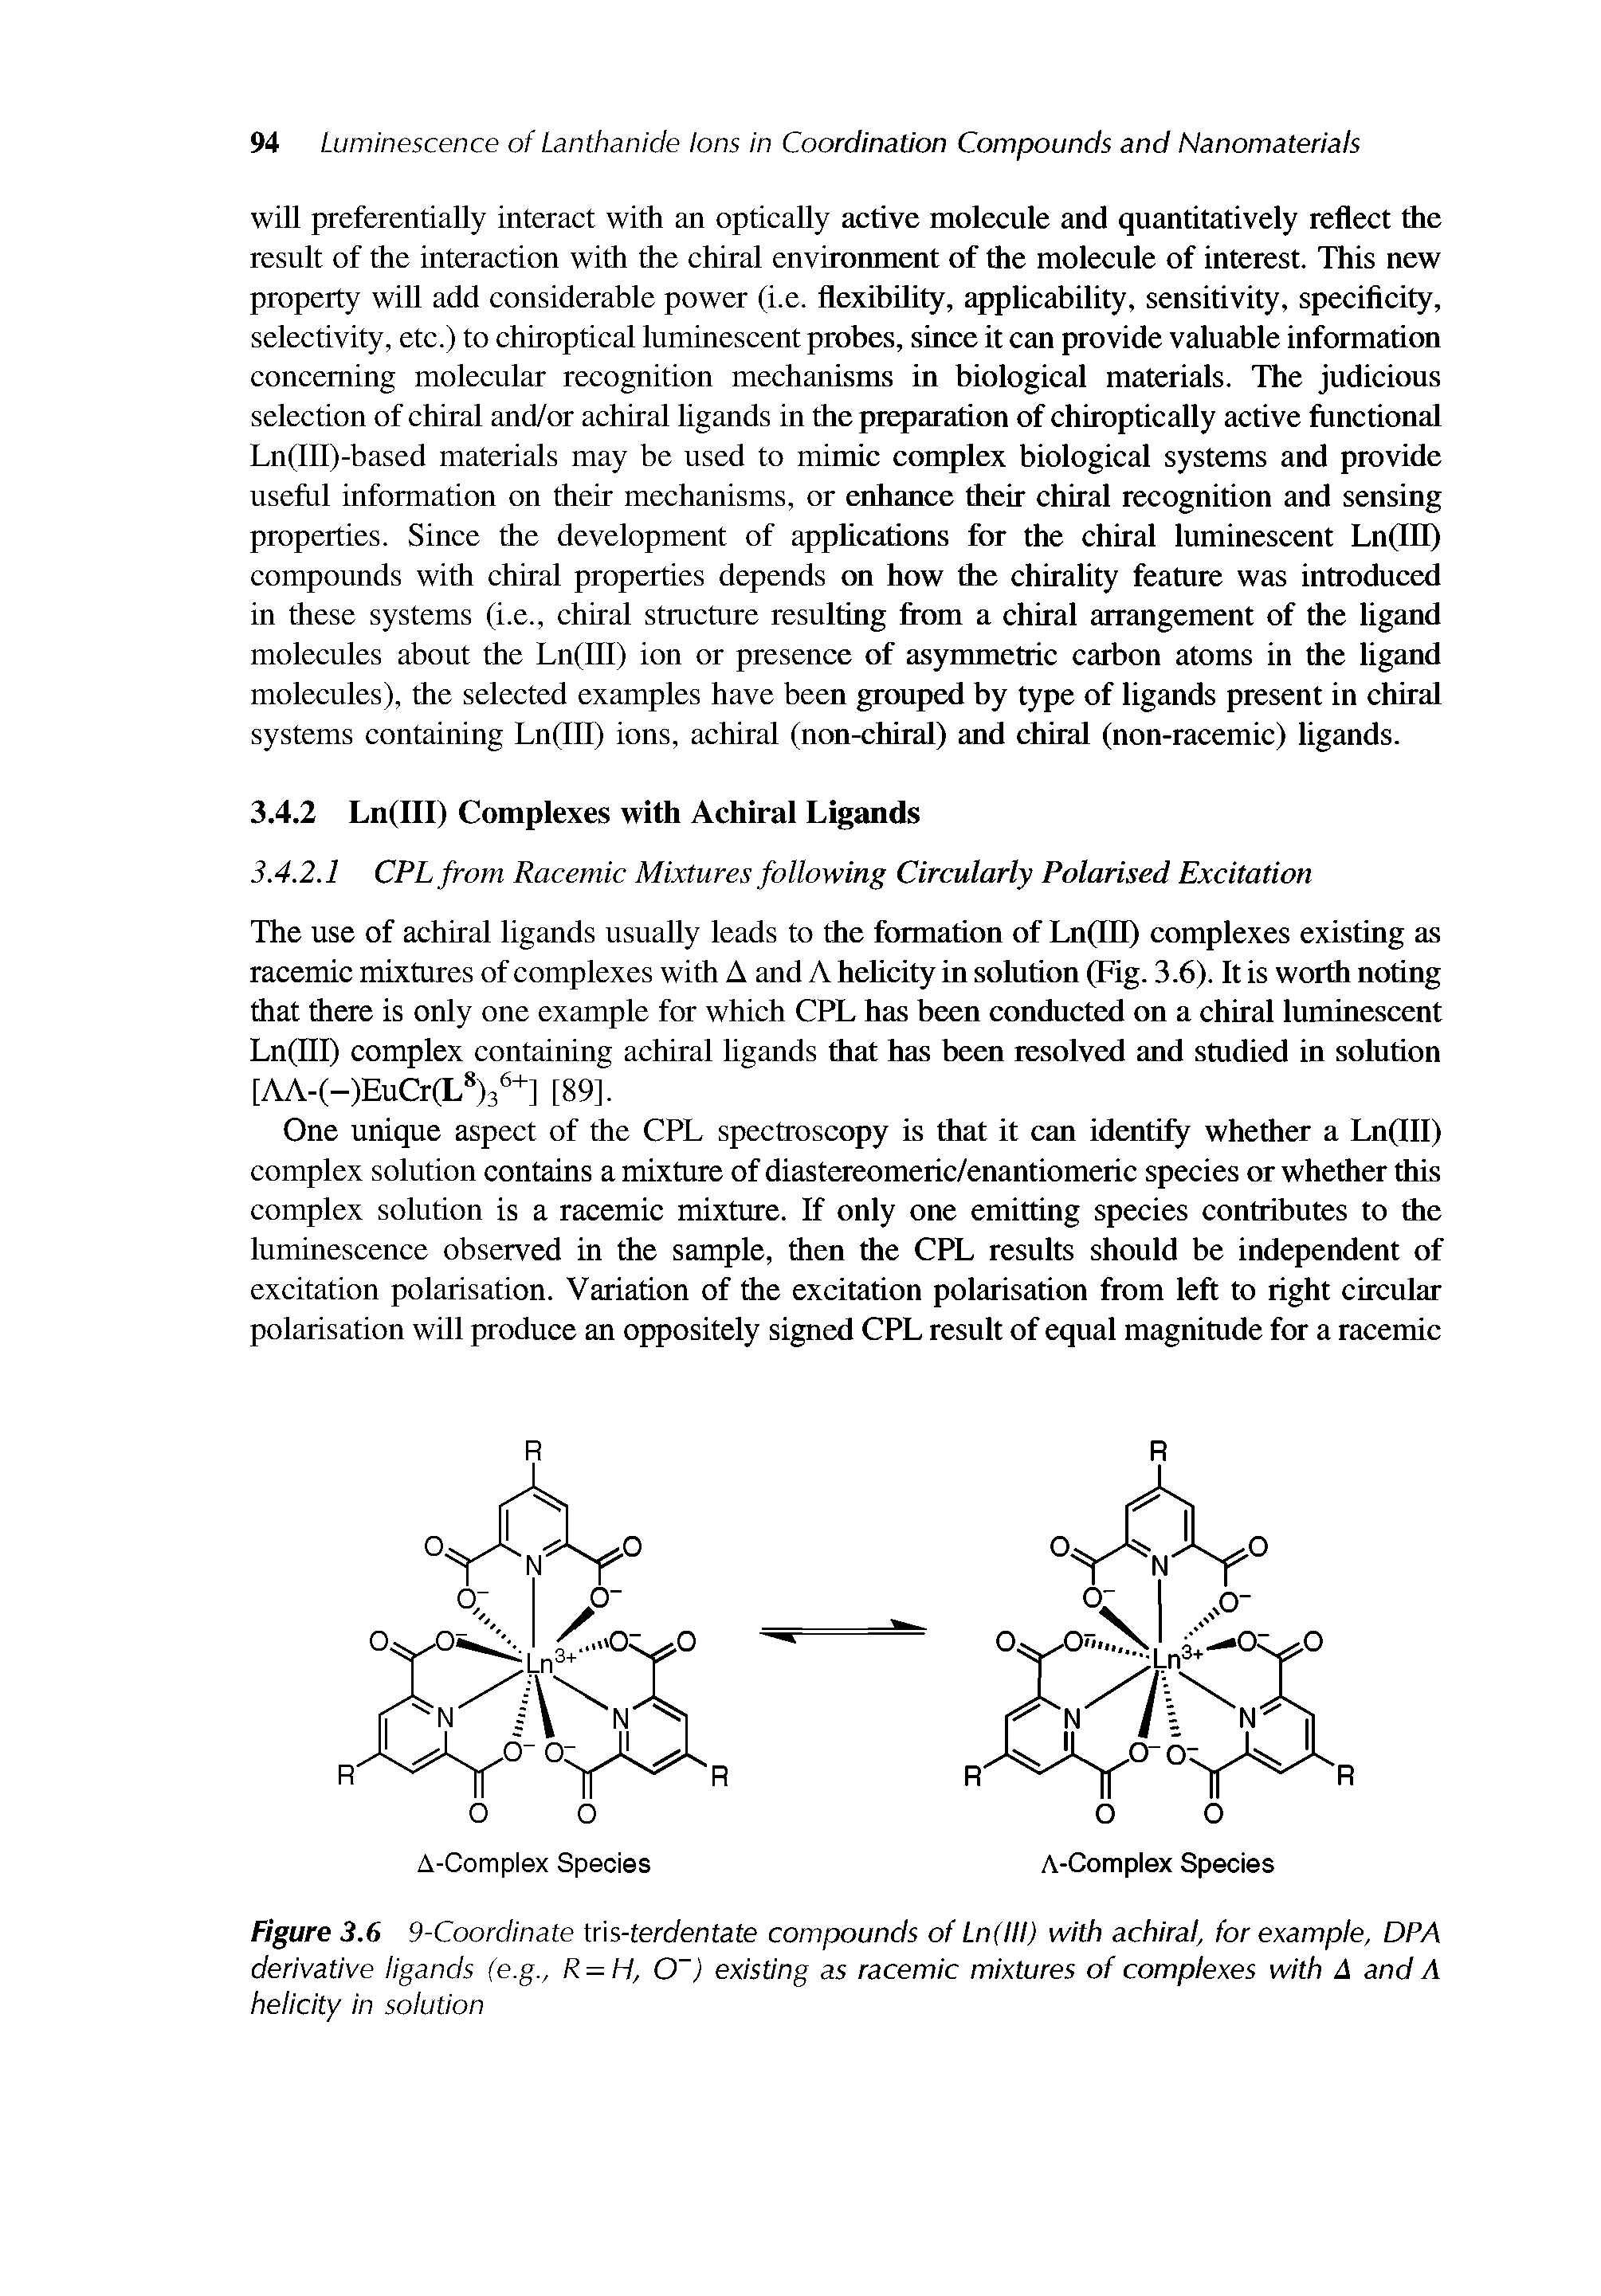 Figure 3.6 9-Coordinate tns-terdentate compounds of Ln(lll) with achiral, for example, DP A derivative ligands (e.g., R = H, 0 ) existing as racemic mixtures of complexes with A and A helicity in solution...